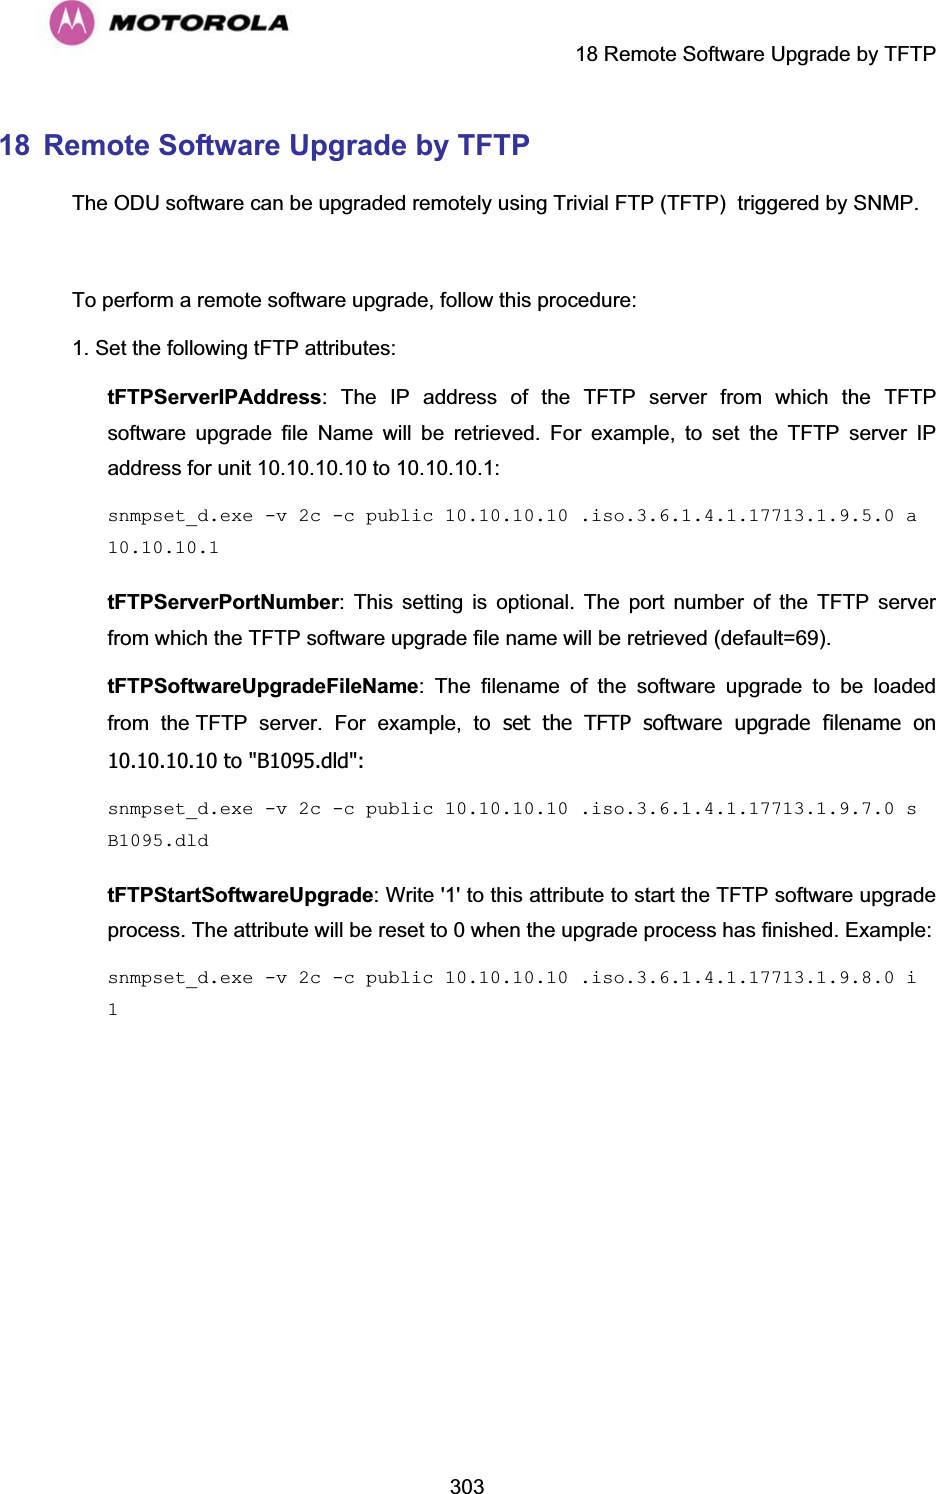     18 Remote Software Upgrade by TFTP  30318  Remote Software Upgrade by TFTP The ODU software can be upgraded remotely using Trivial FTP (TFTP)  triggered by SNMP.    To perform a remote software upgrade, follow this procedure: 1. Set the following tFTP attributes: tFTPServerIPAddress: The IP address of the TFTP server from which the TFTP software upgrade file Name will be retrieved. For example, to set the TFTP server IP address for unit 10.10.10.10 to 10.10.10.1: snmpset_d.exe -v 2c -c public 10.10.10.10 .iso.3.6.1.4.1.17713.1.9.5.0 a 10.10.10.1tFTPServerPortNumber: This setting is optional. The port number of the TFTP server from which the TFTP software upgrade file name will be retrieved (default=69). tFTPSoftwareUpgradeFileName: The filename of the software upgrade to be loaded from the TFTP server. For example, to set the TFTP software upgrade filename on 10.10.10.10 to &quot;B1095.dld&quot;: snmpset_d.exe -v 2c -c public 10.10.10.10 .iso.3.6.1.4.1.17713.1.9.7.0 s B1095.dldtFTPStartSoftwareUpgrade: Write &apos;1&apos; to this attribute to start the TFTP software upgrade process. The attribute will be reset to 0 when the upgrade process has finished. Example: snmpset_d.exe -v 2c -c public 10.10.10.10 .iso.3.6.1.4.1.17713.1.9.8.0 i 1  